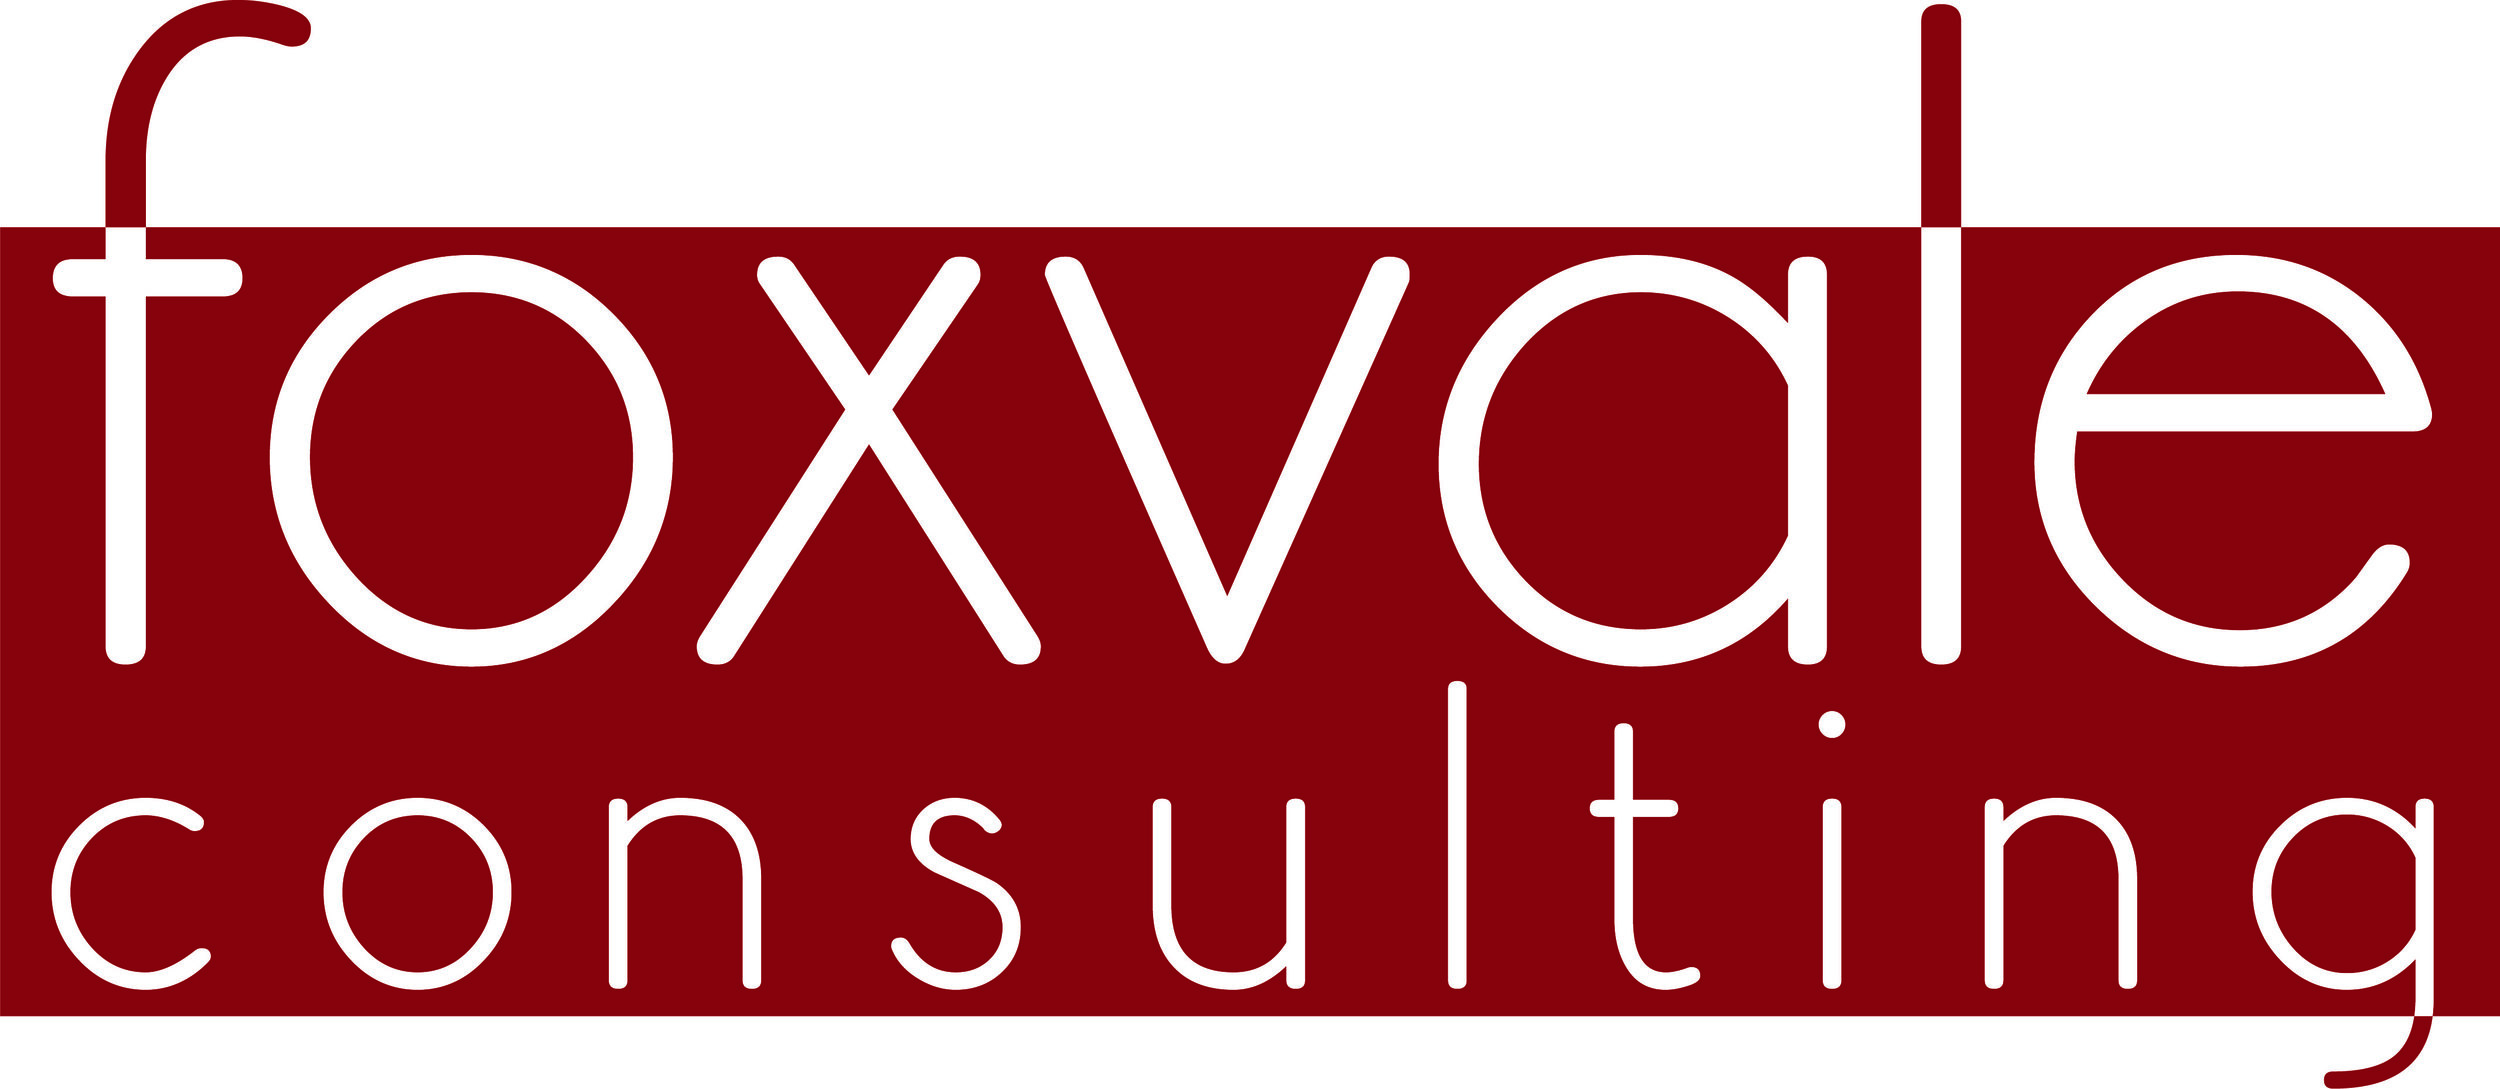 Foxvale Consulting